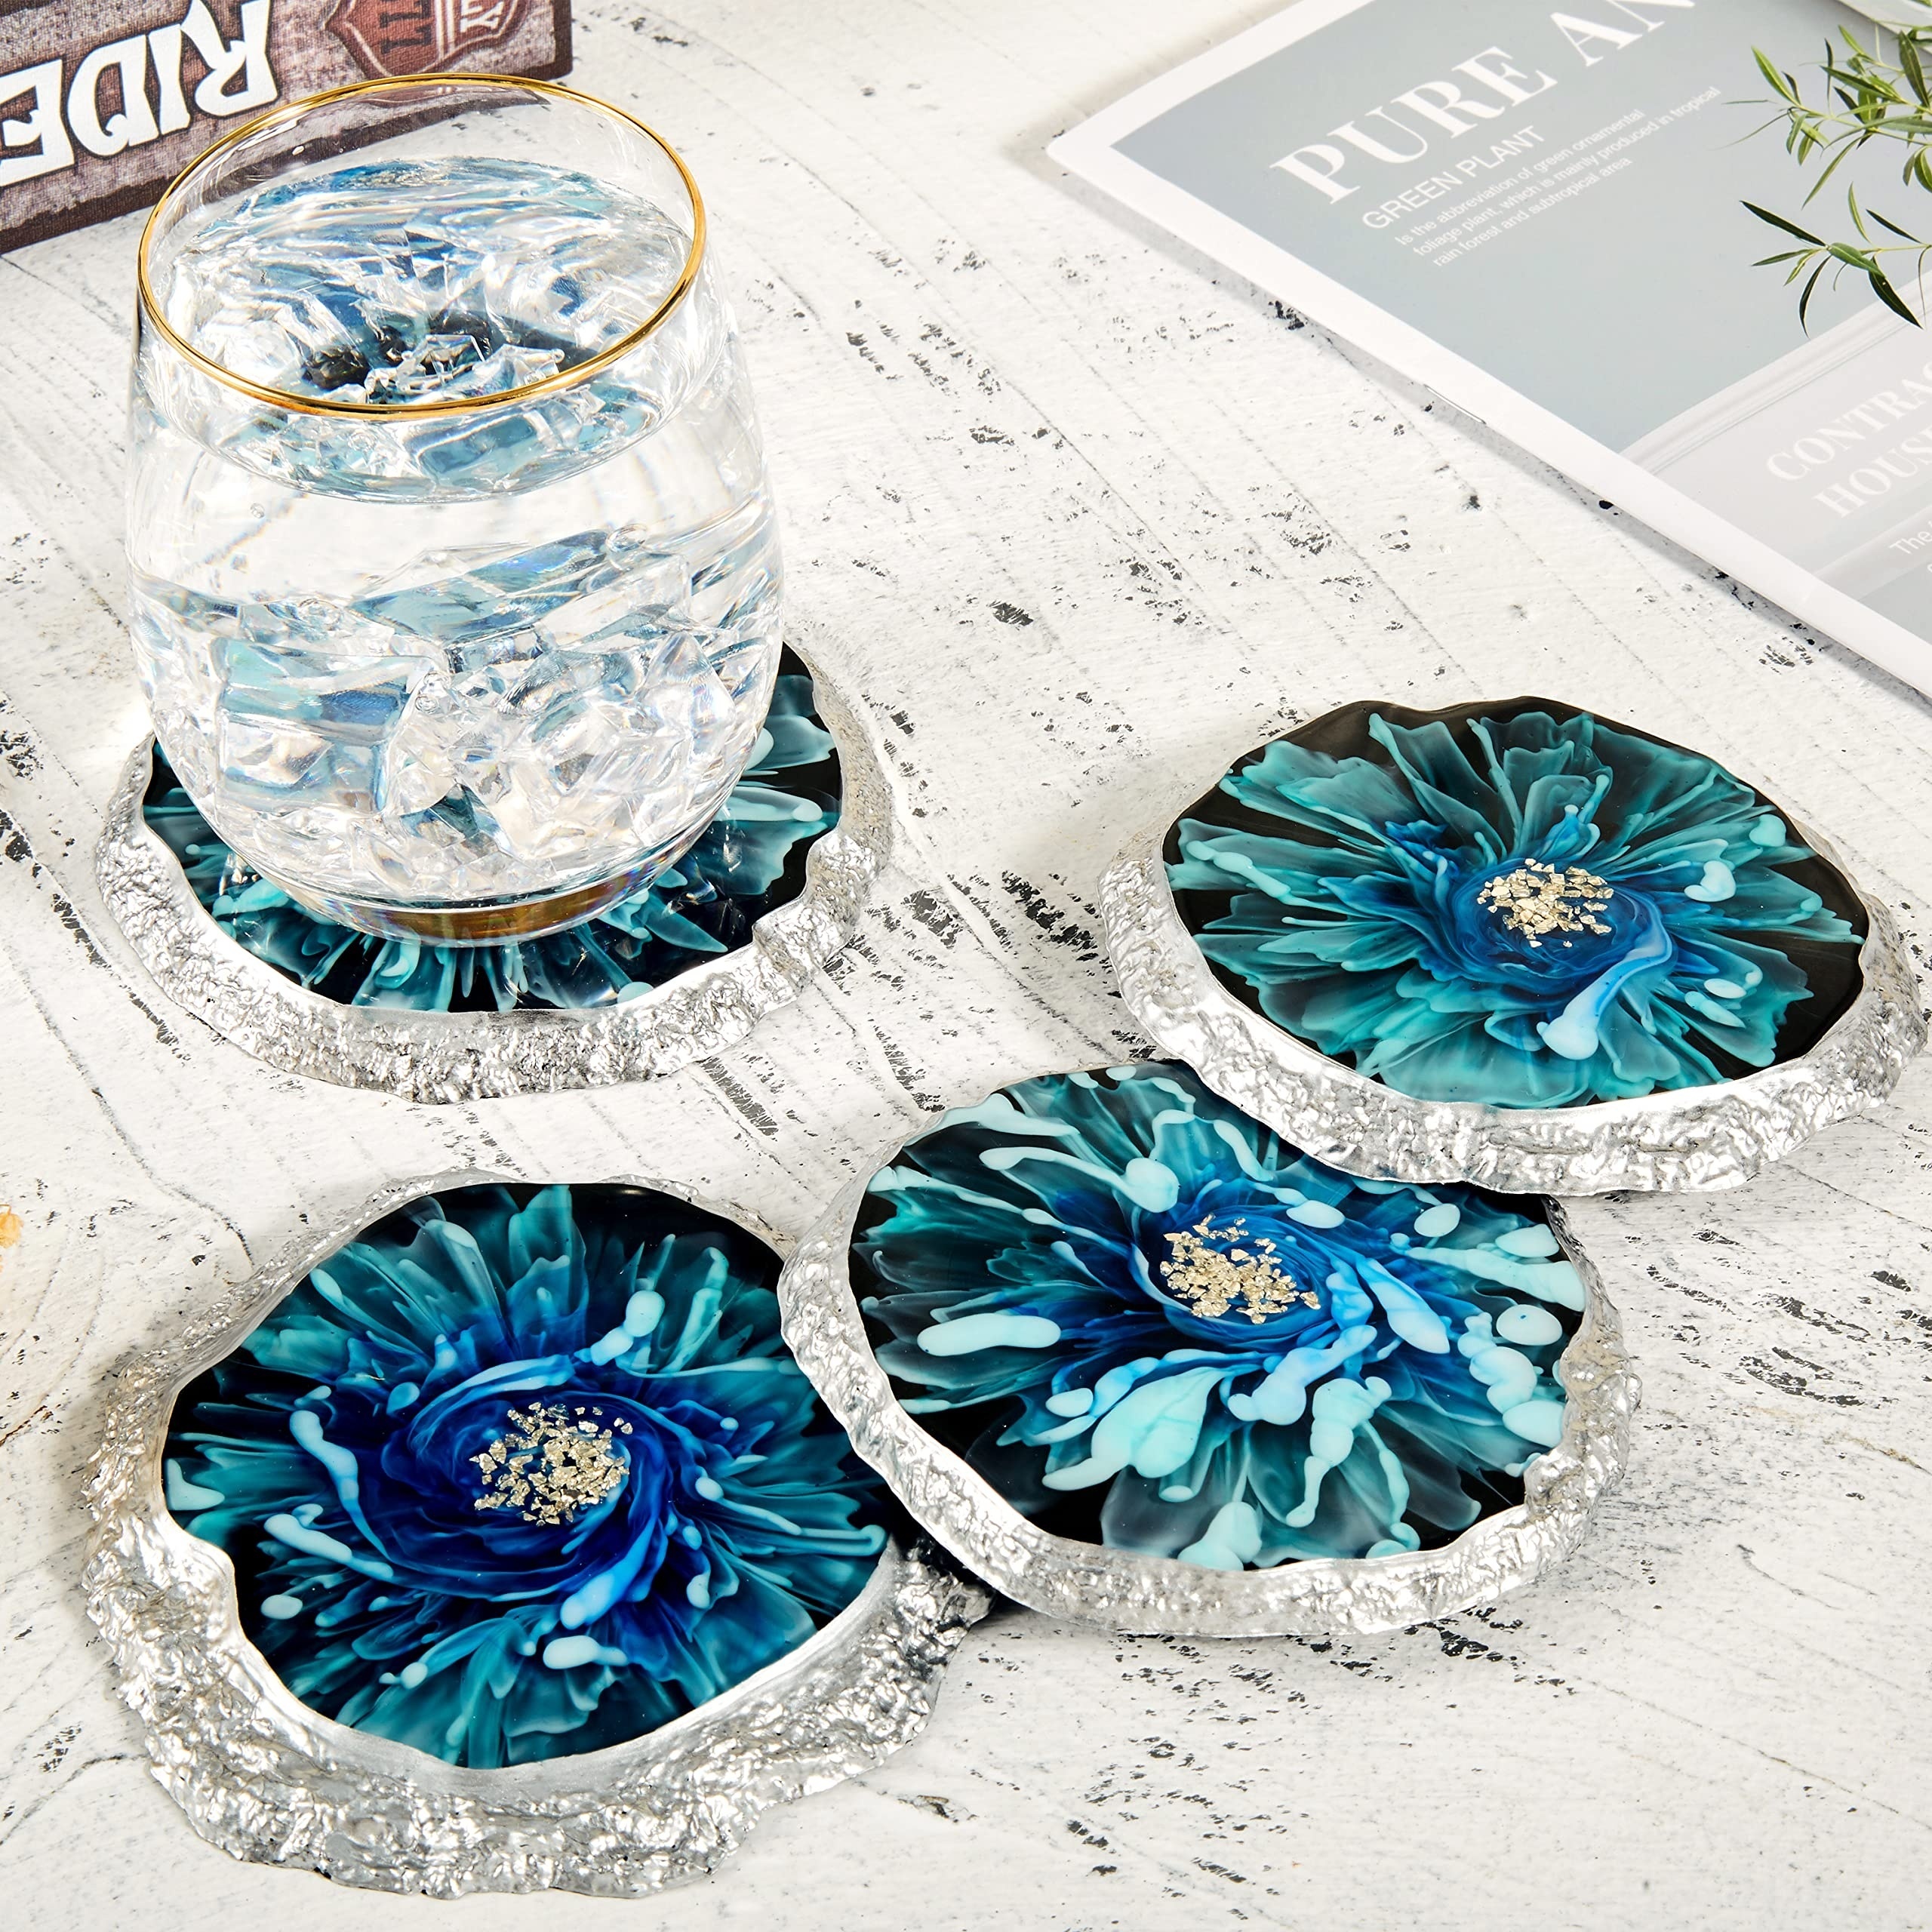 Silicone Coaster Mold for Resin, Silicone Geode Coaster Mold for